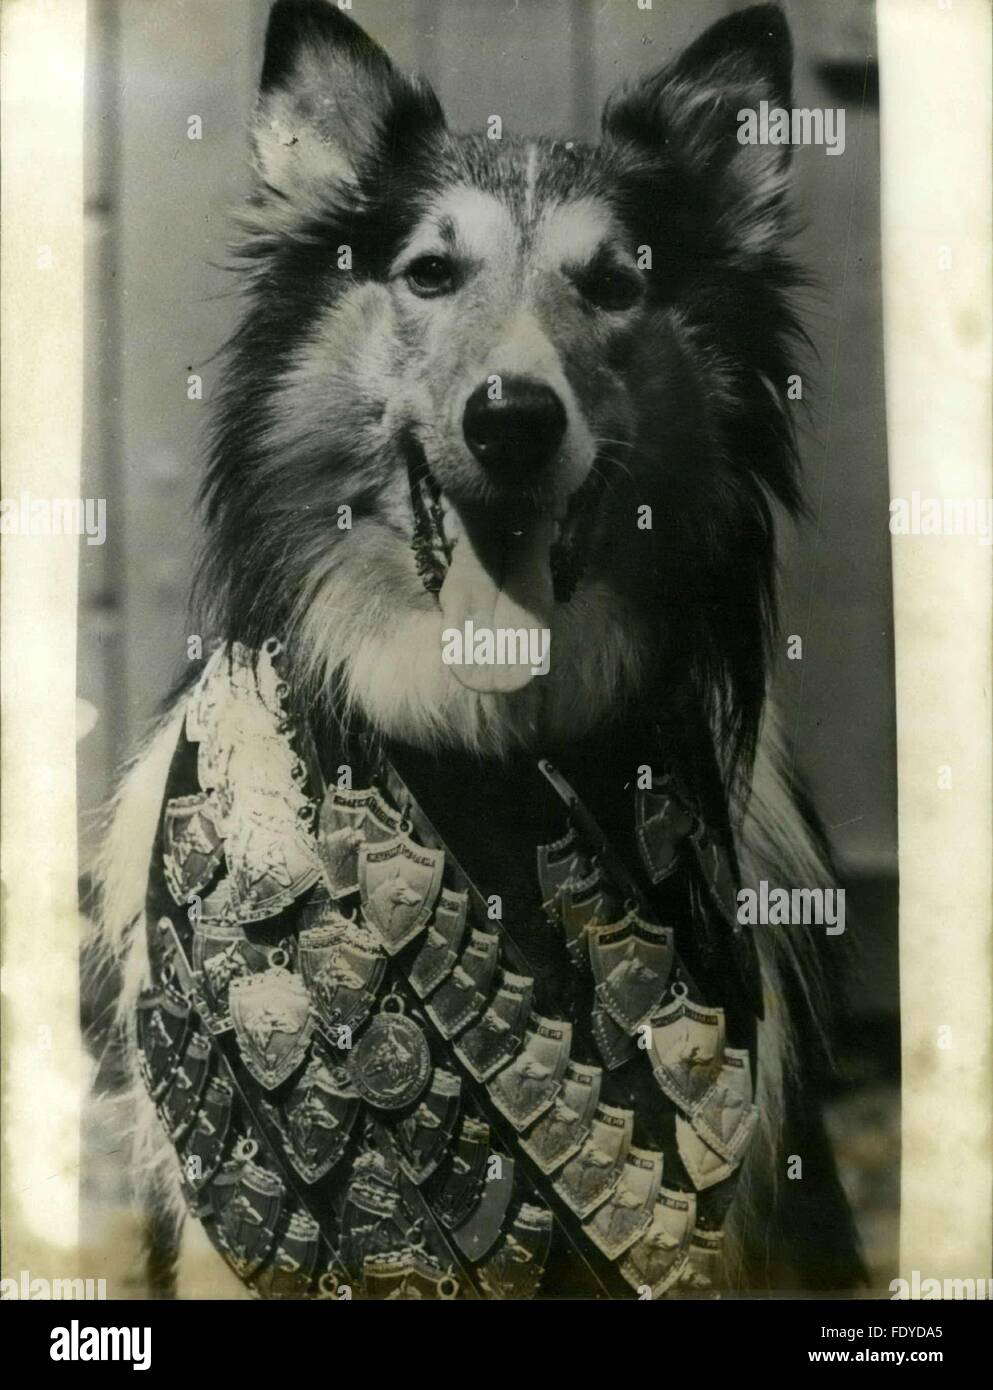 1968 - A Good Dog: Photo shows A dog of the canine exposition which takes place now in Moscow, and who detain the record of decorations. Woman Drives Electronic Car, Paris, France © Keystone Pictures USA/ZUMAPRESS.com/Alamy Live News Stock Photo